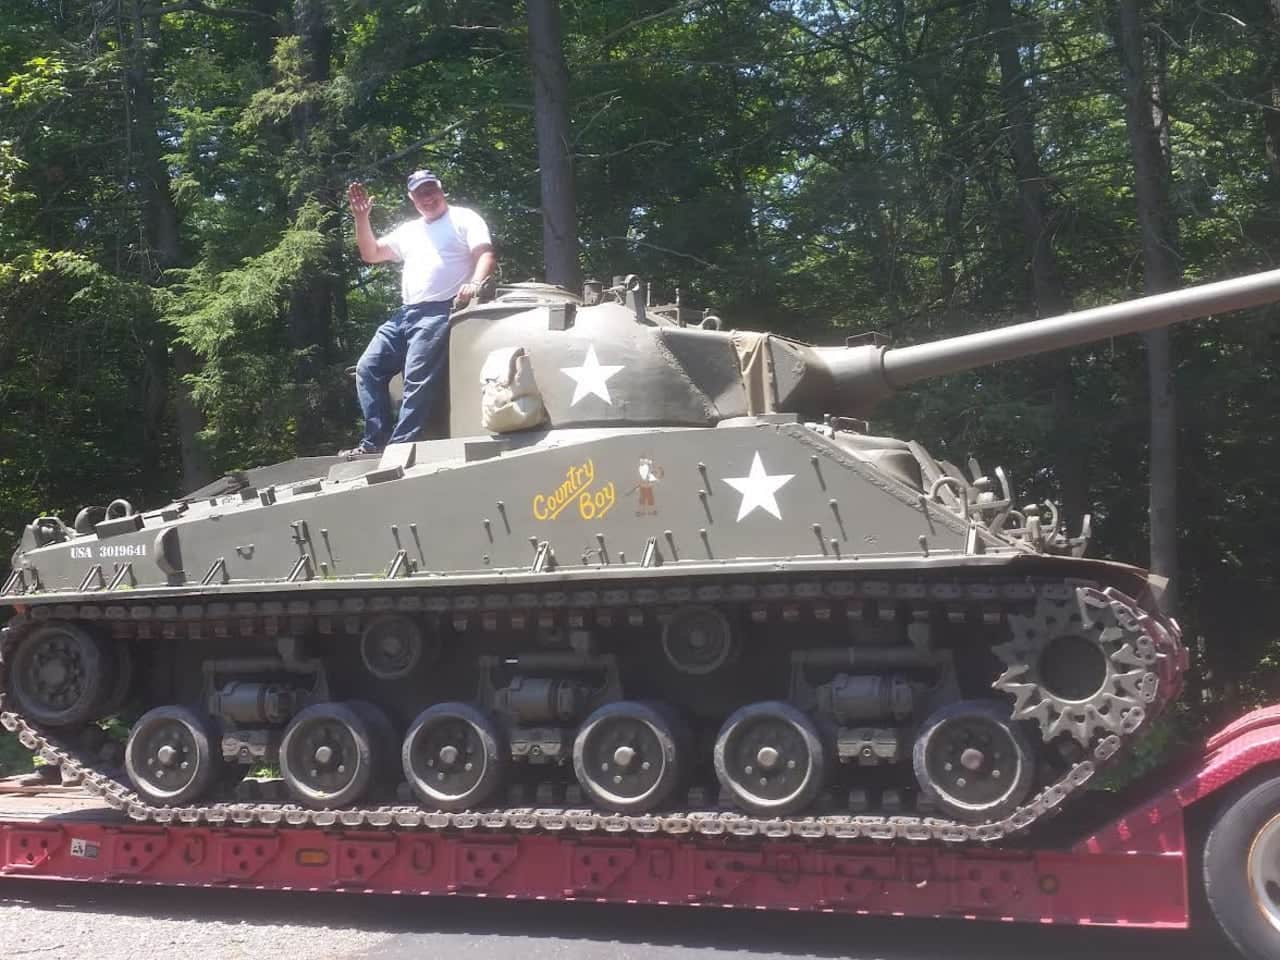 Bud Walker atop his World War II vintage Sherman tank, which will be on display with other Army vehicles at the Historic and Military Vehicles Show at Lasdon Park, Arboretum and Veterans Memorial, Saturday and Sunday, July 1 and 2.